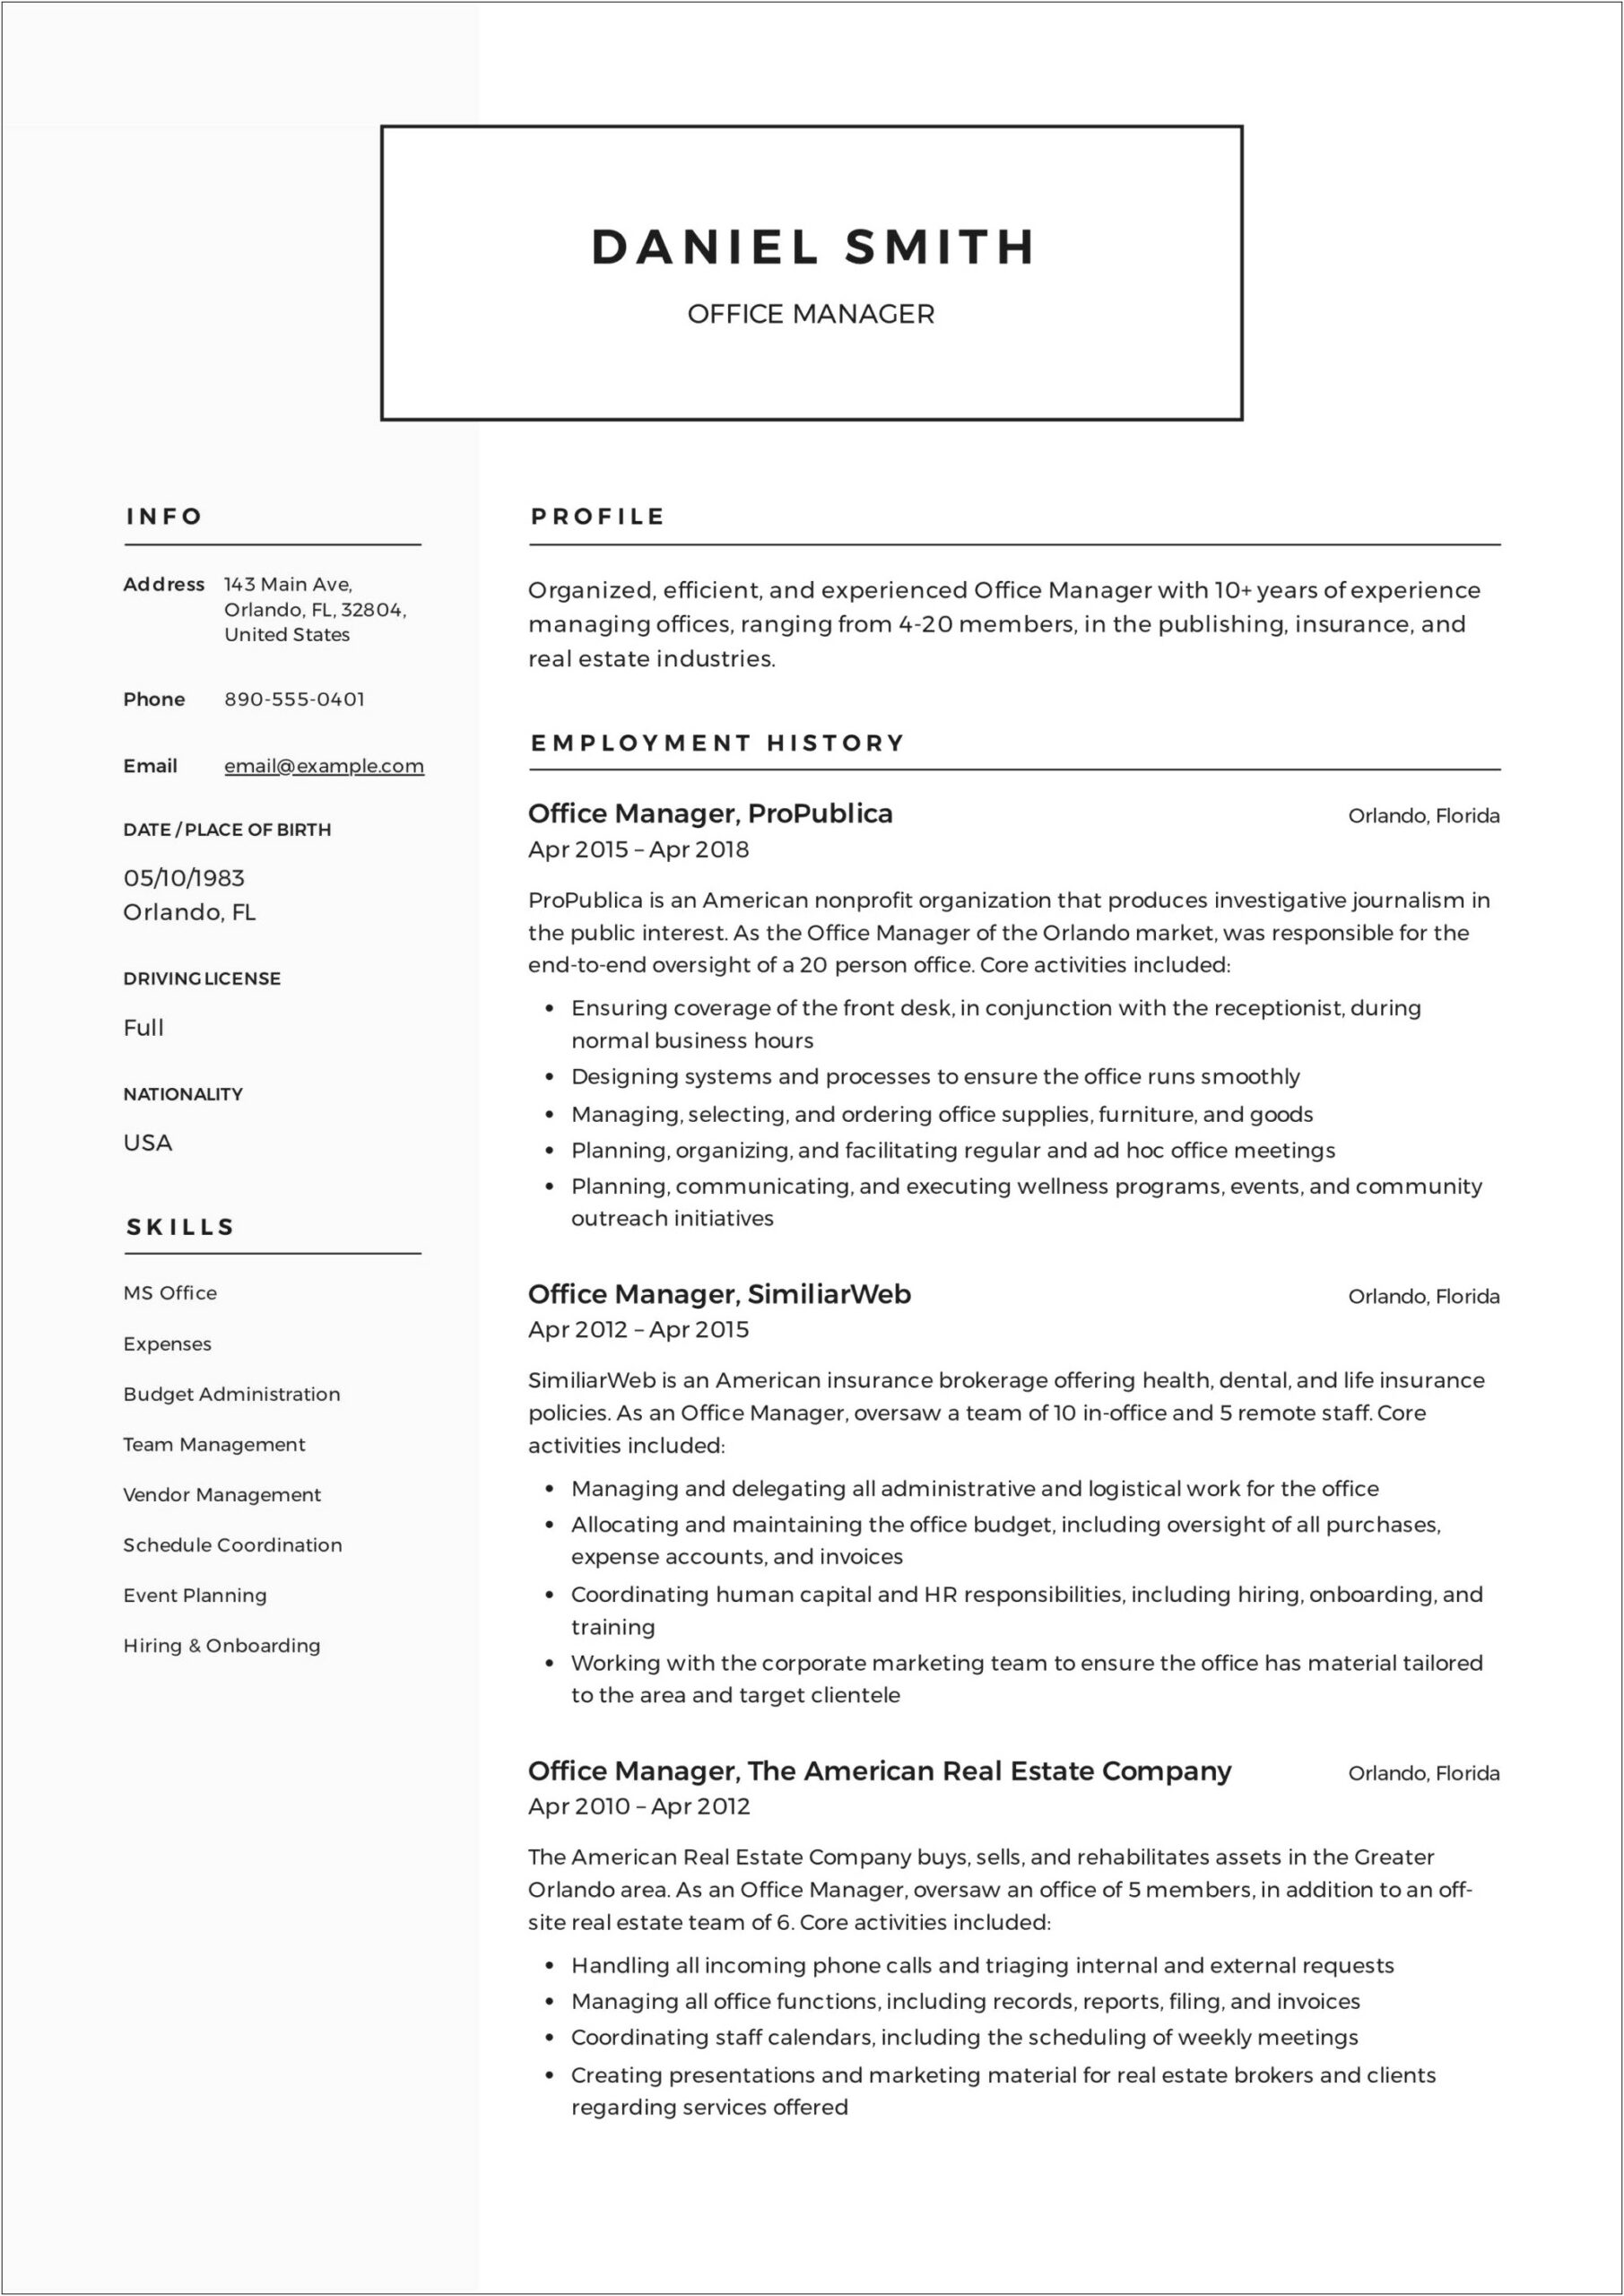 Office Manager On A Resume